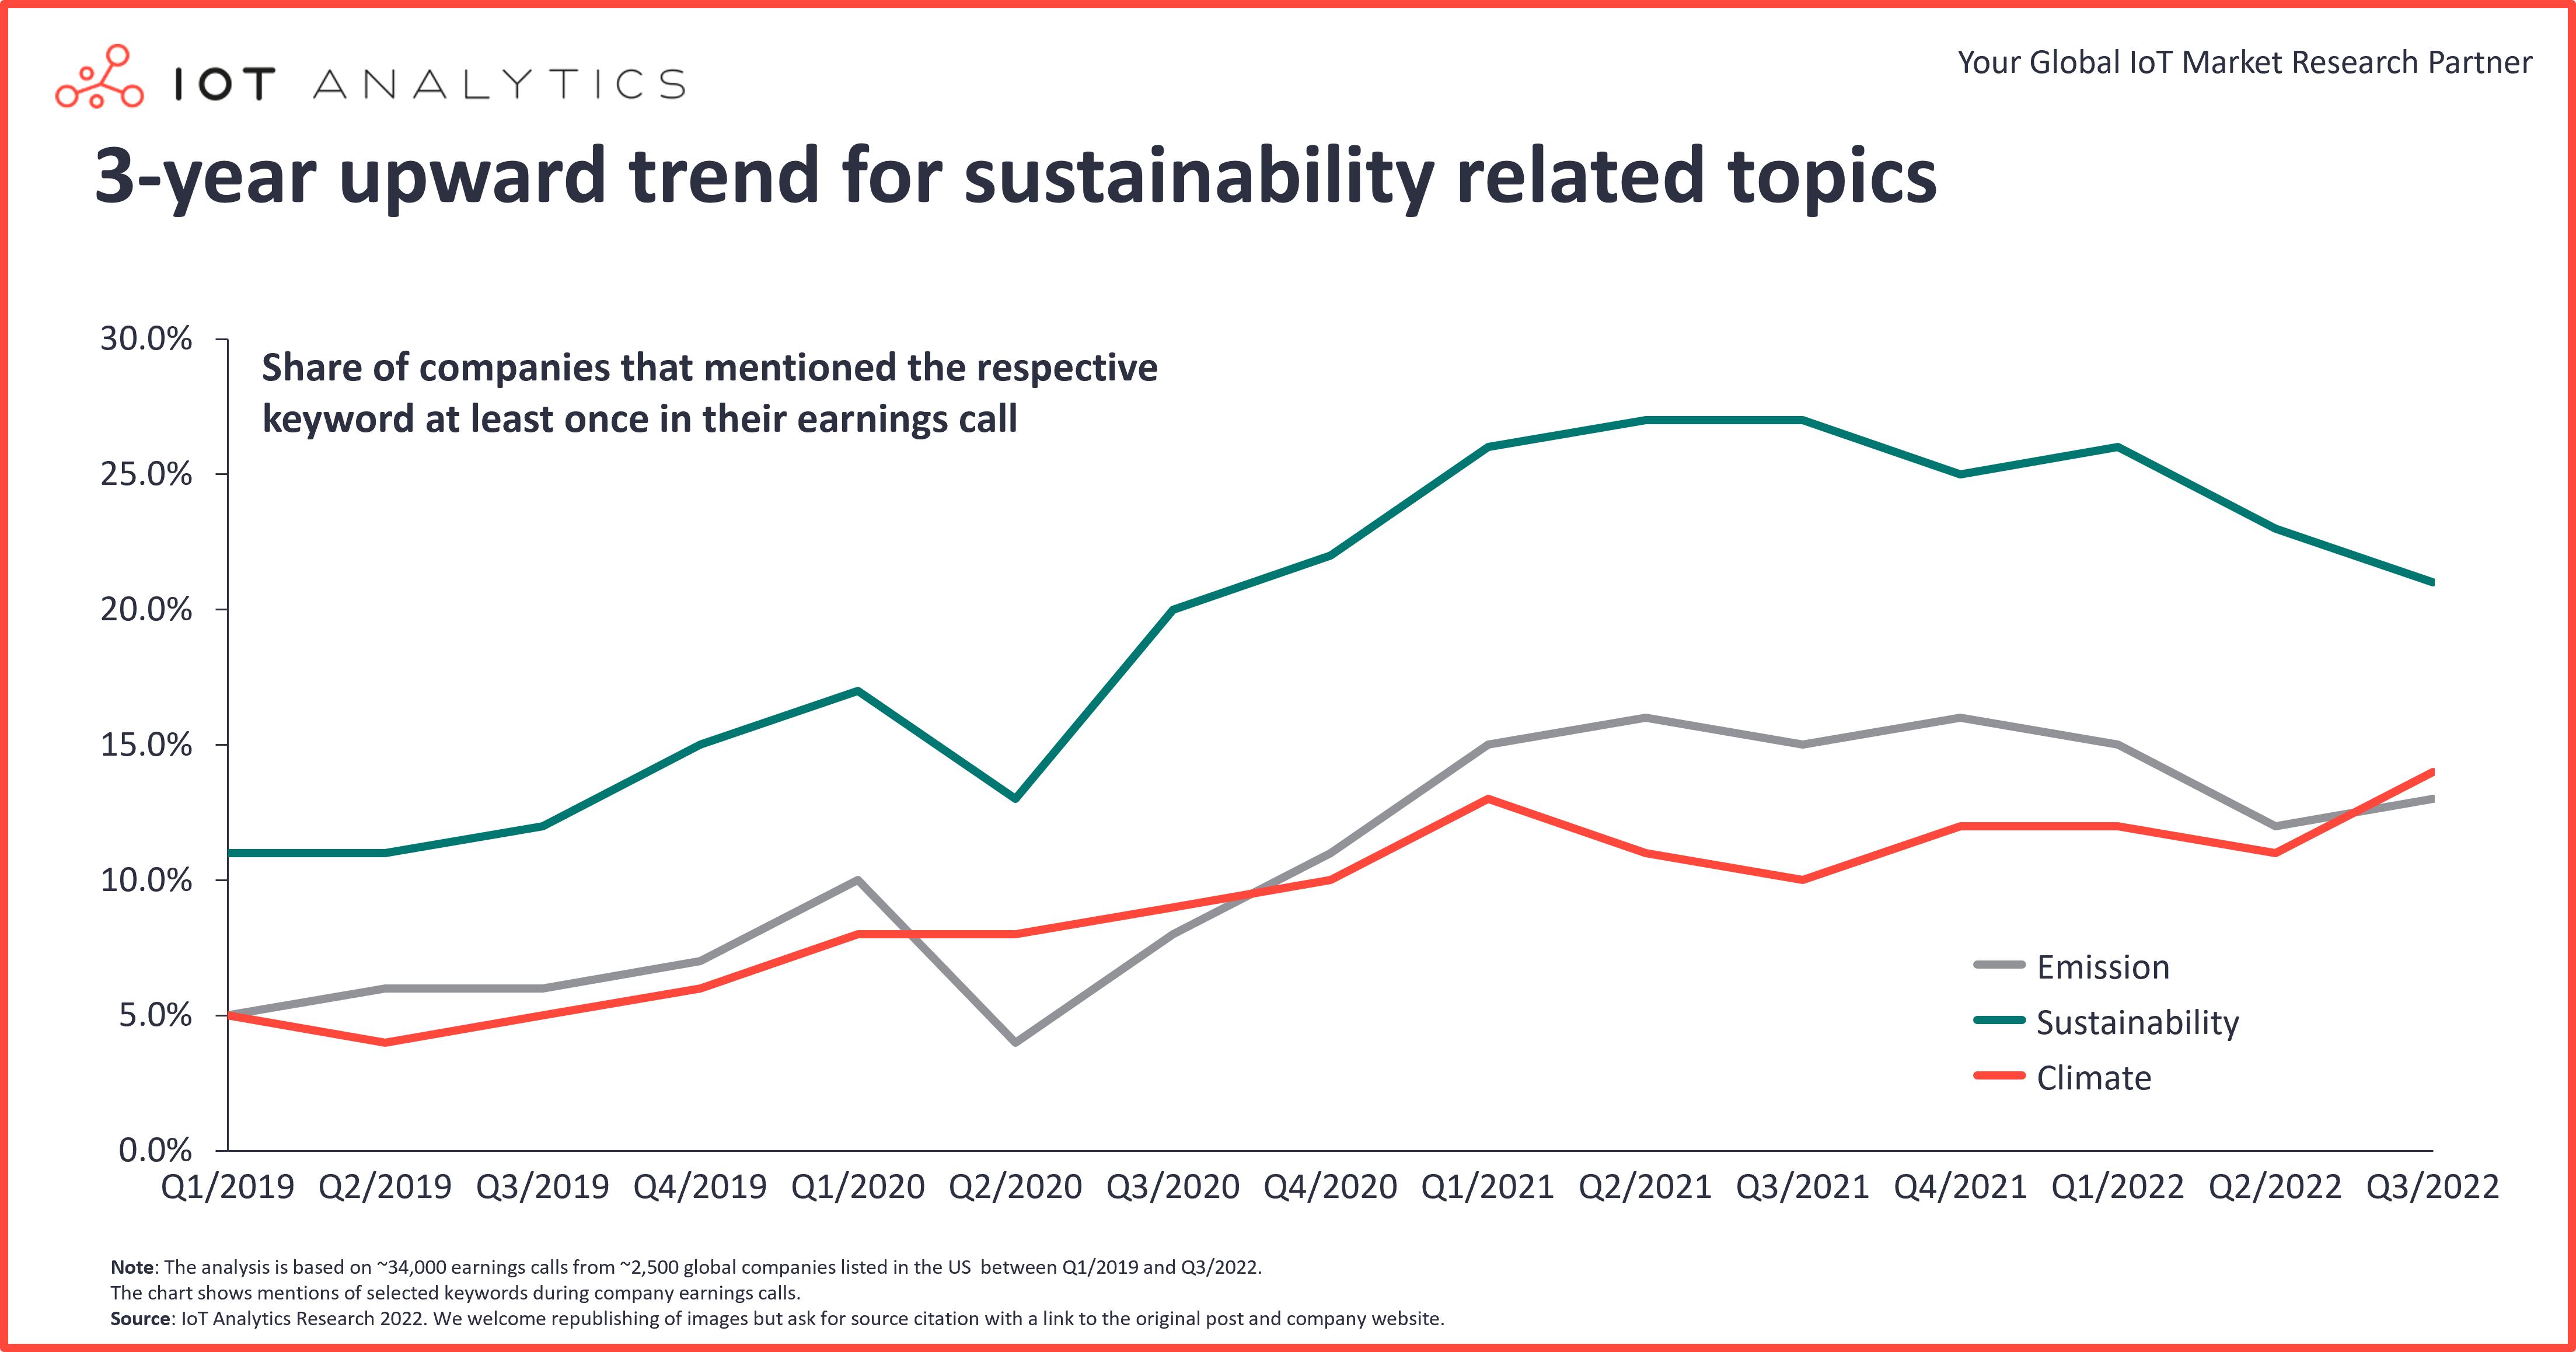 3-year upward trend for sustainability-related topics